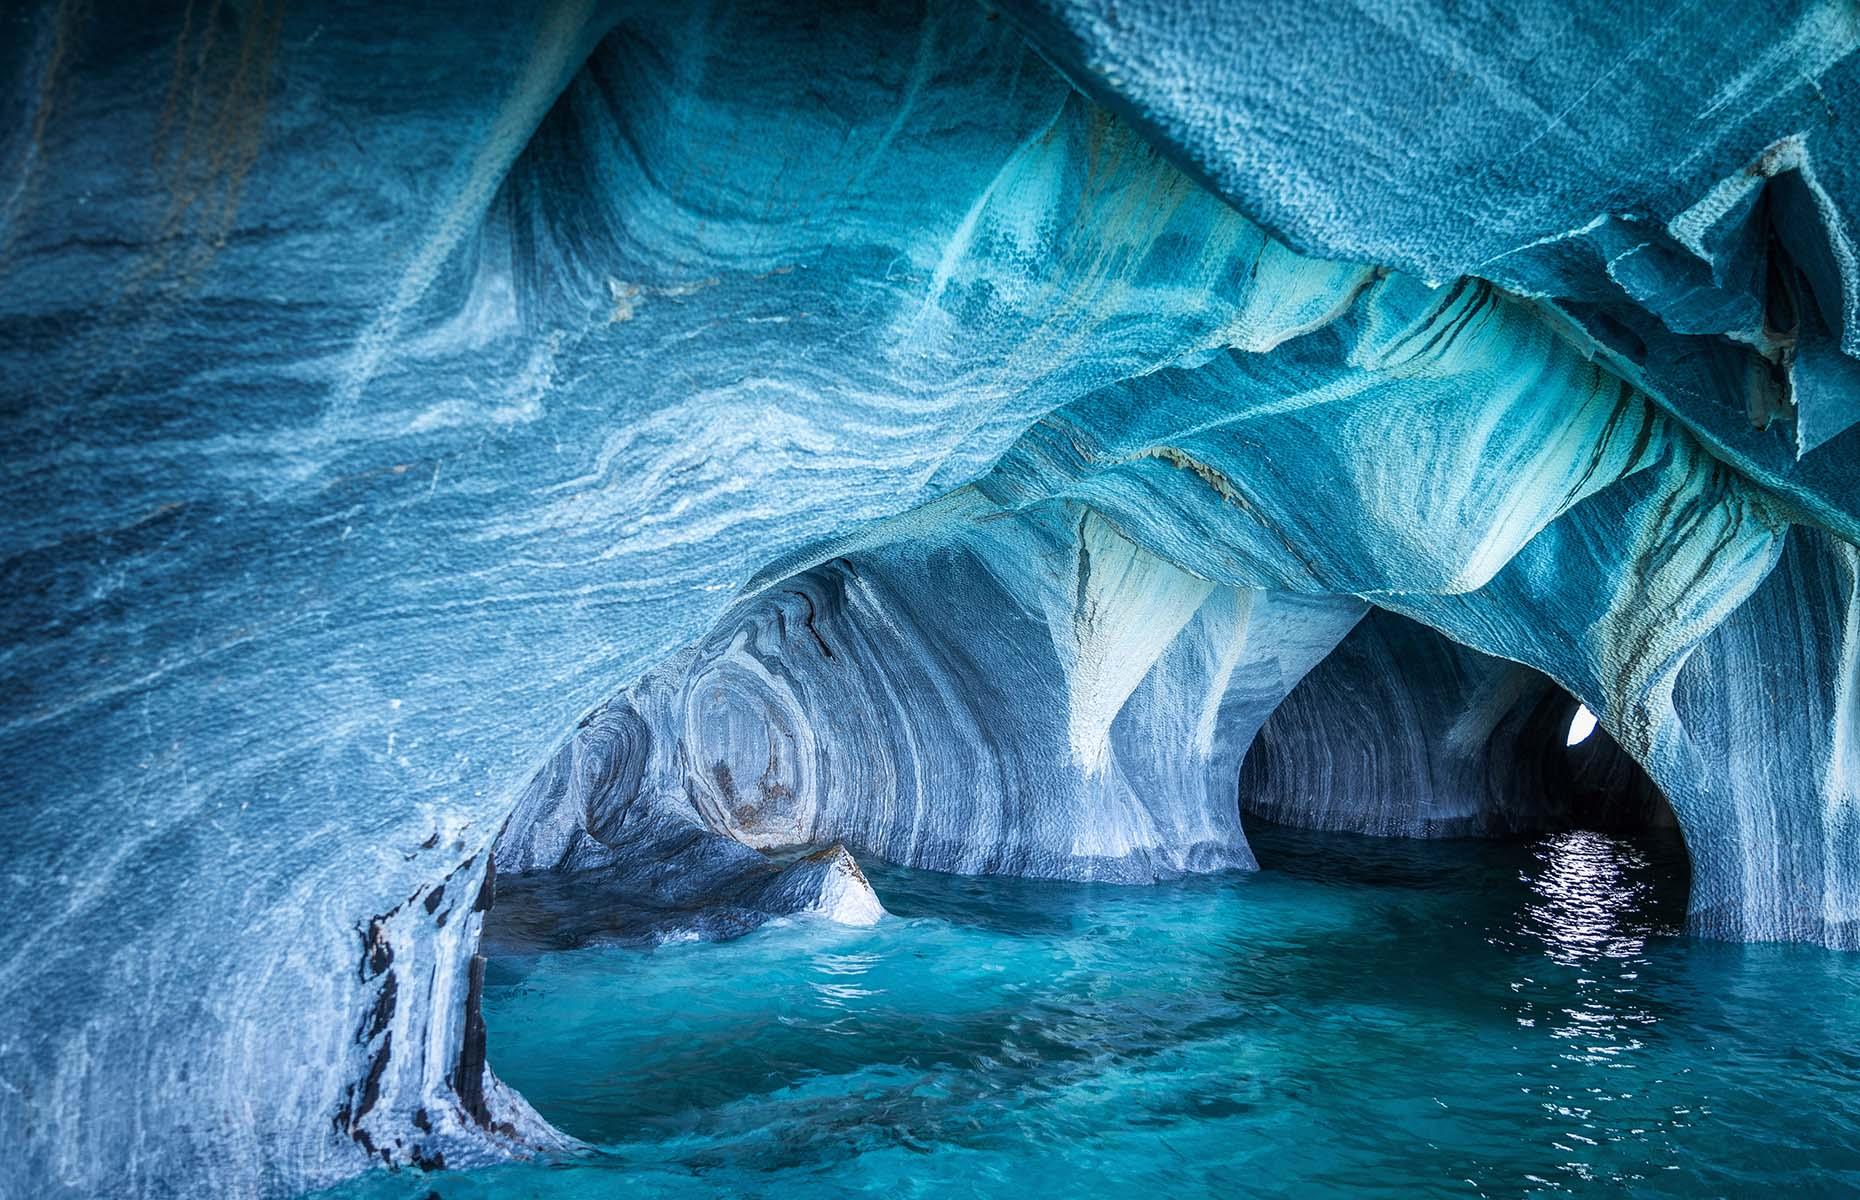 It's easy to see how this remote wonder earned its name. The calcium carbonate caves have been chiseled out by the sea over thousands of years, and the resulting swirls of turquoise, mint and smoky gray look just like marble. Their far-out location on the General Carrera Lake in Patagonia means they've stayed largely untouched and unspoiled.